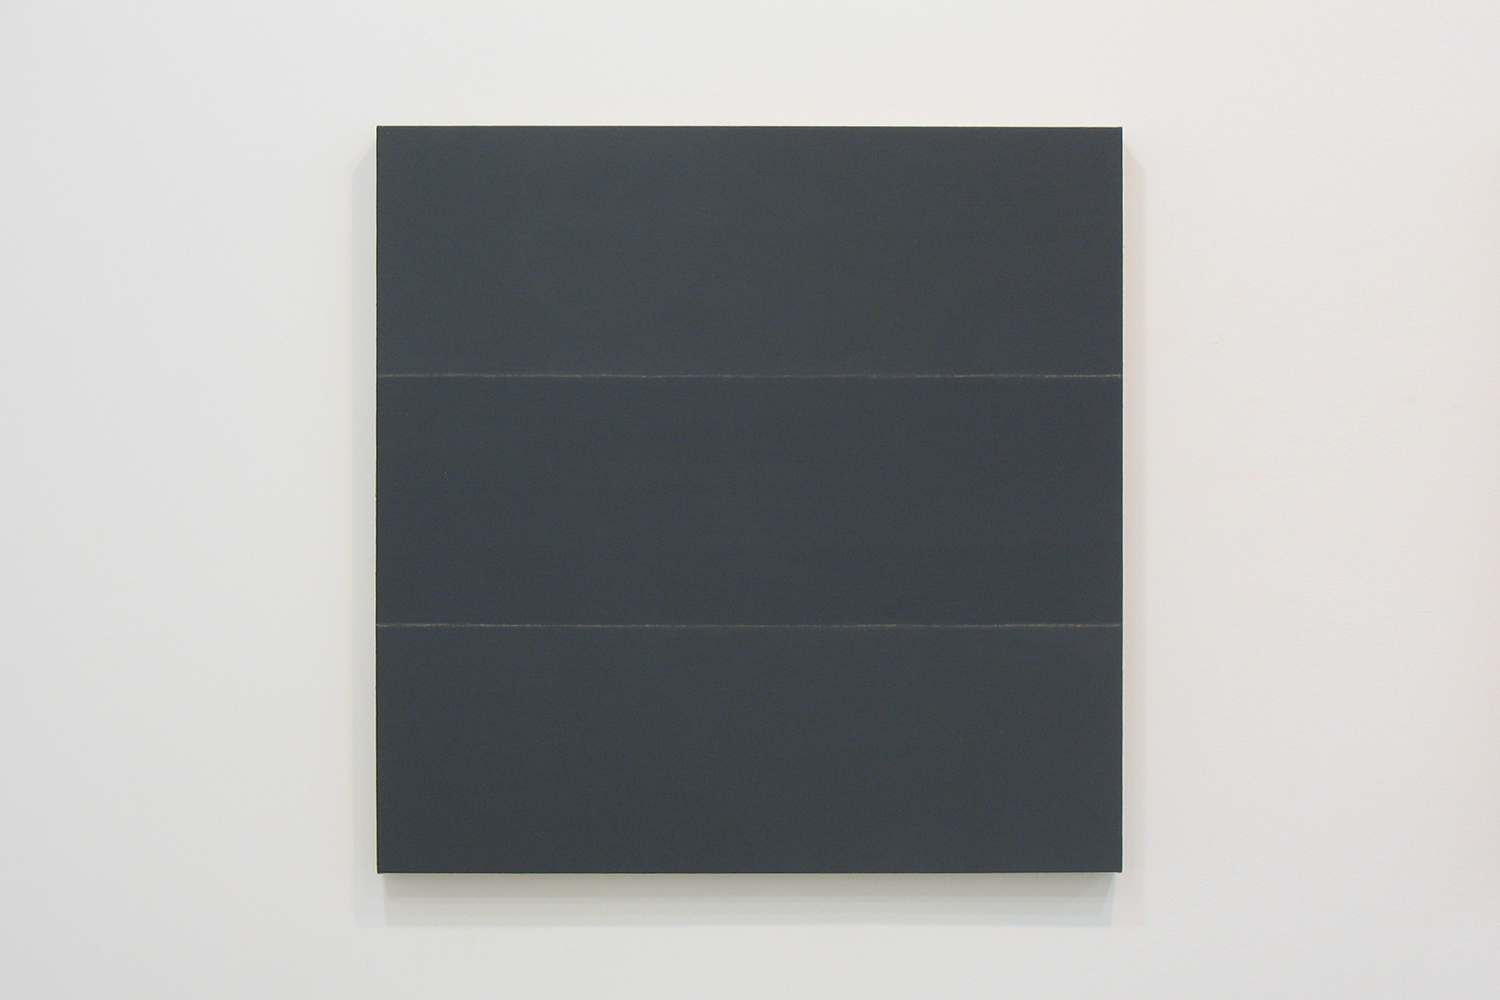 TS0824｜Gesso on linen on panel｜60 x 60 cm｜2008